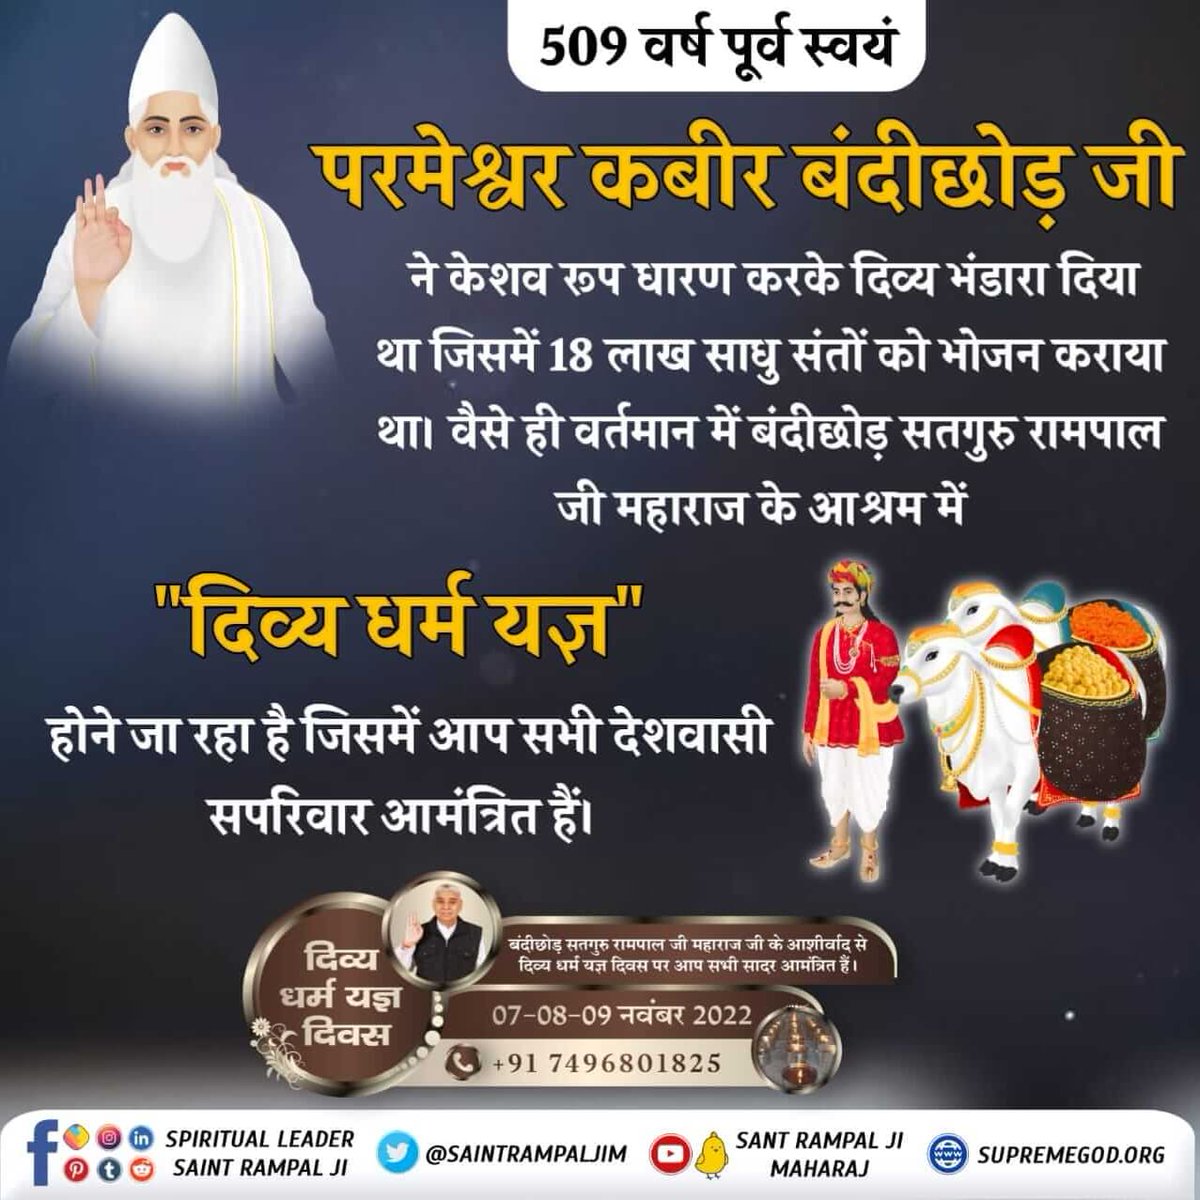 #DivineBhandaraBySantRampalJi दिव्य धर्म यज्ञ दिवस All kinds of dishes were brought from there. Out of nine lakh oxen and one lakh servitors also came from there. Then there was a wonderful Bhandara in Kashi.